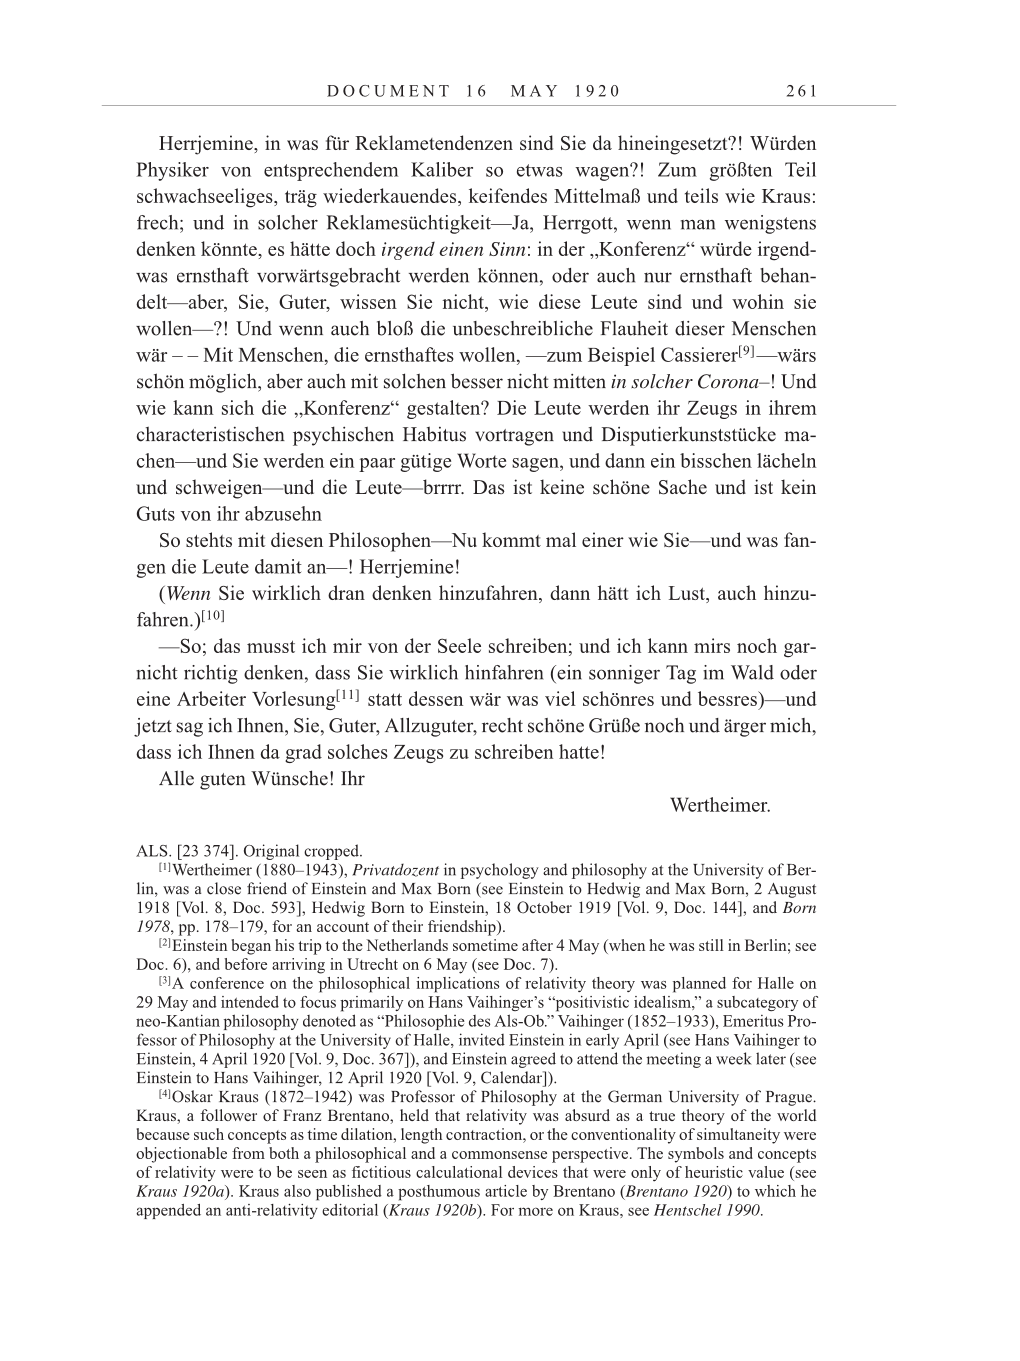 Volume 10: The Berlin Years: Correspondence May-December 1920 / Supplementary Correspondence 1909-1920 page 261